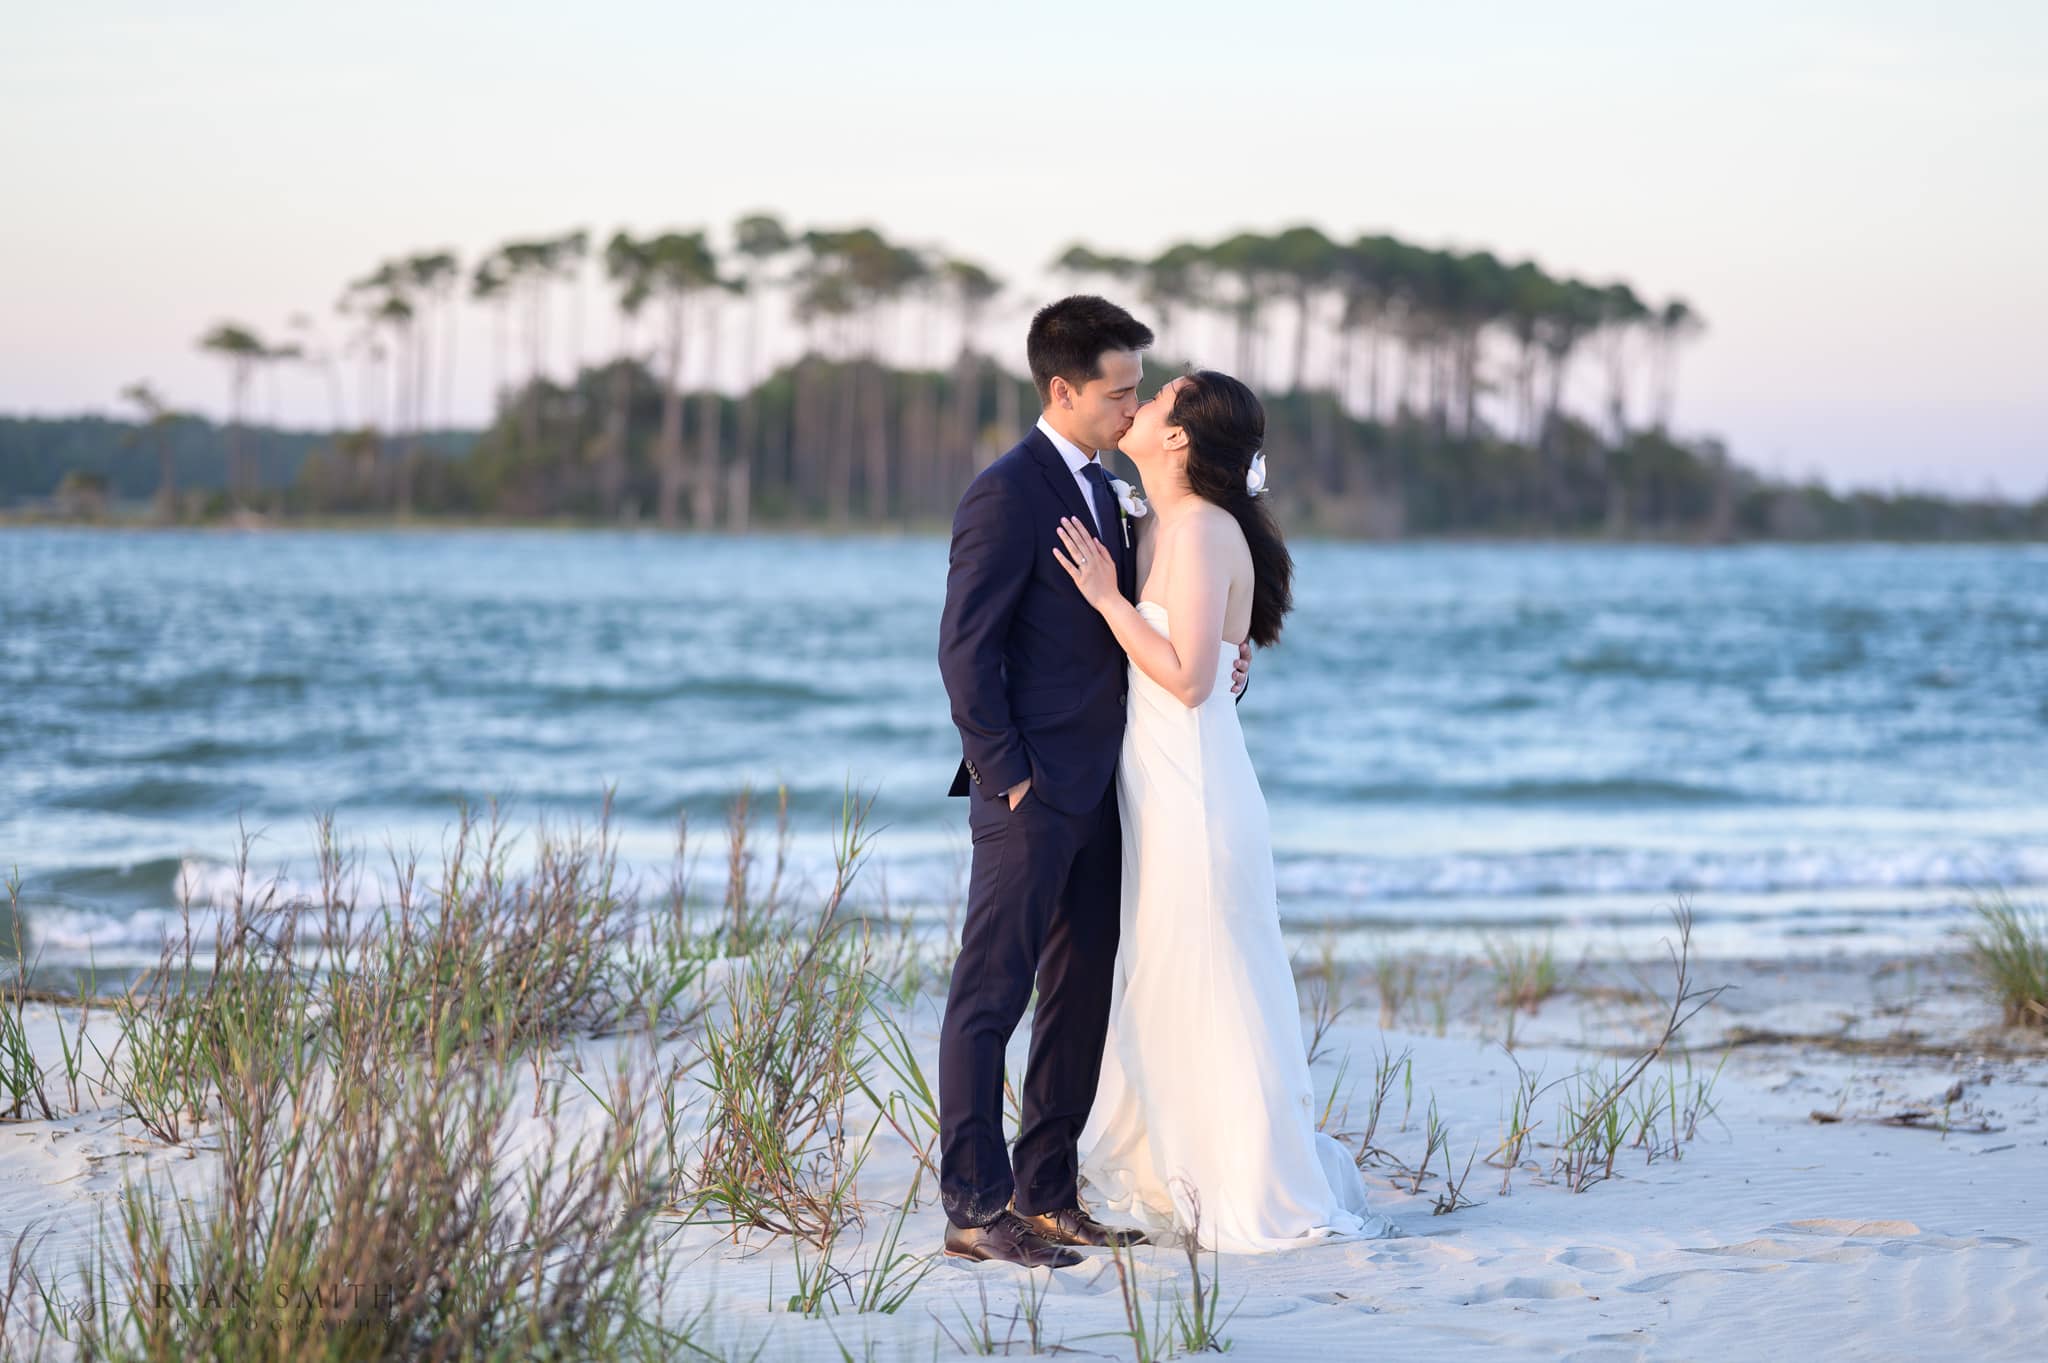 Kiss in front of the water - Cherry Grove Point - North Myrtle Beach